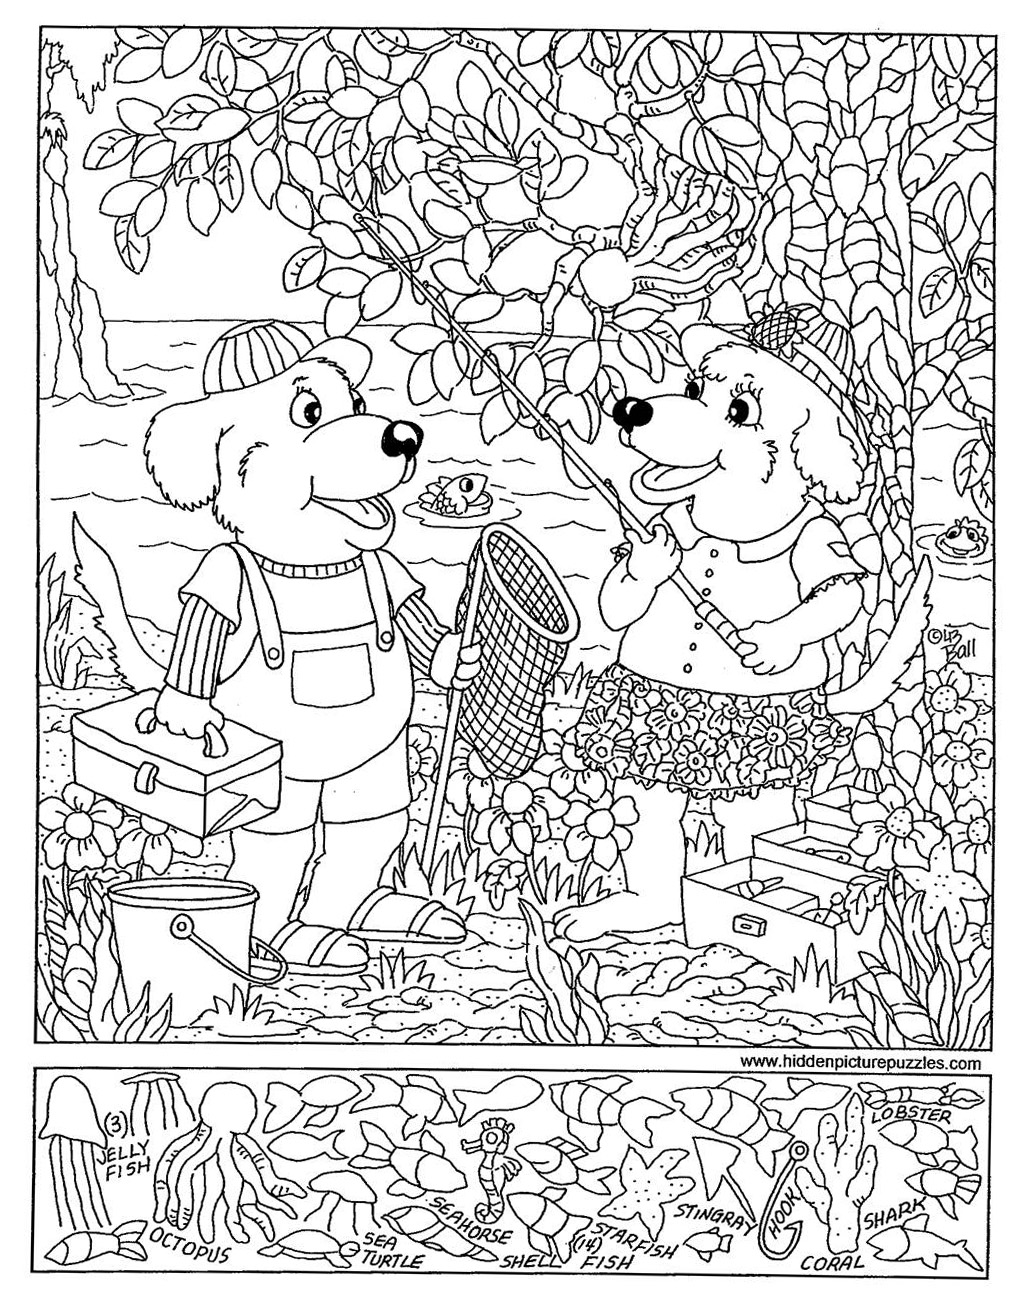 Hidden Pictures Coloring Pages at GetDrawings Free download